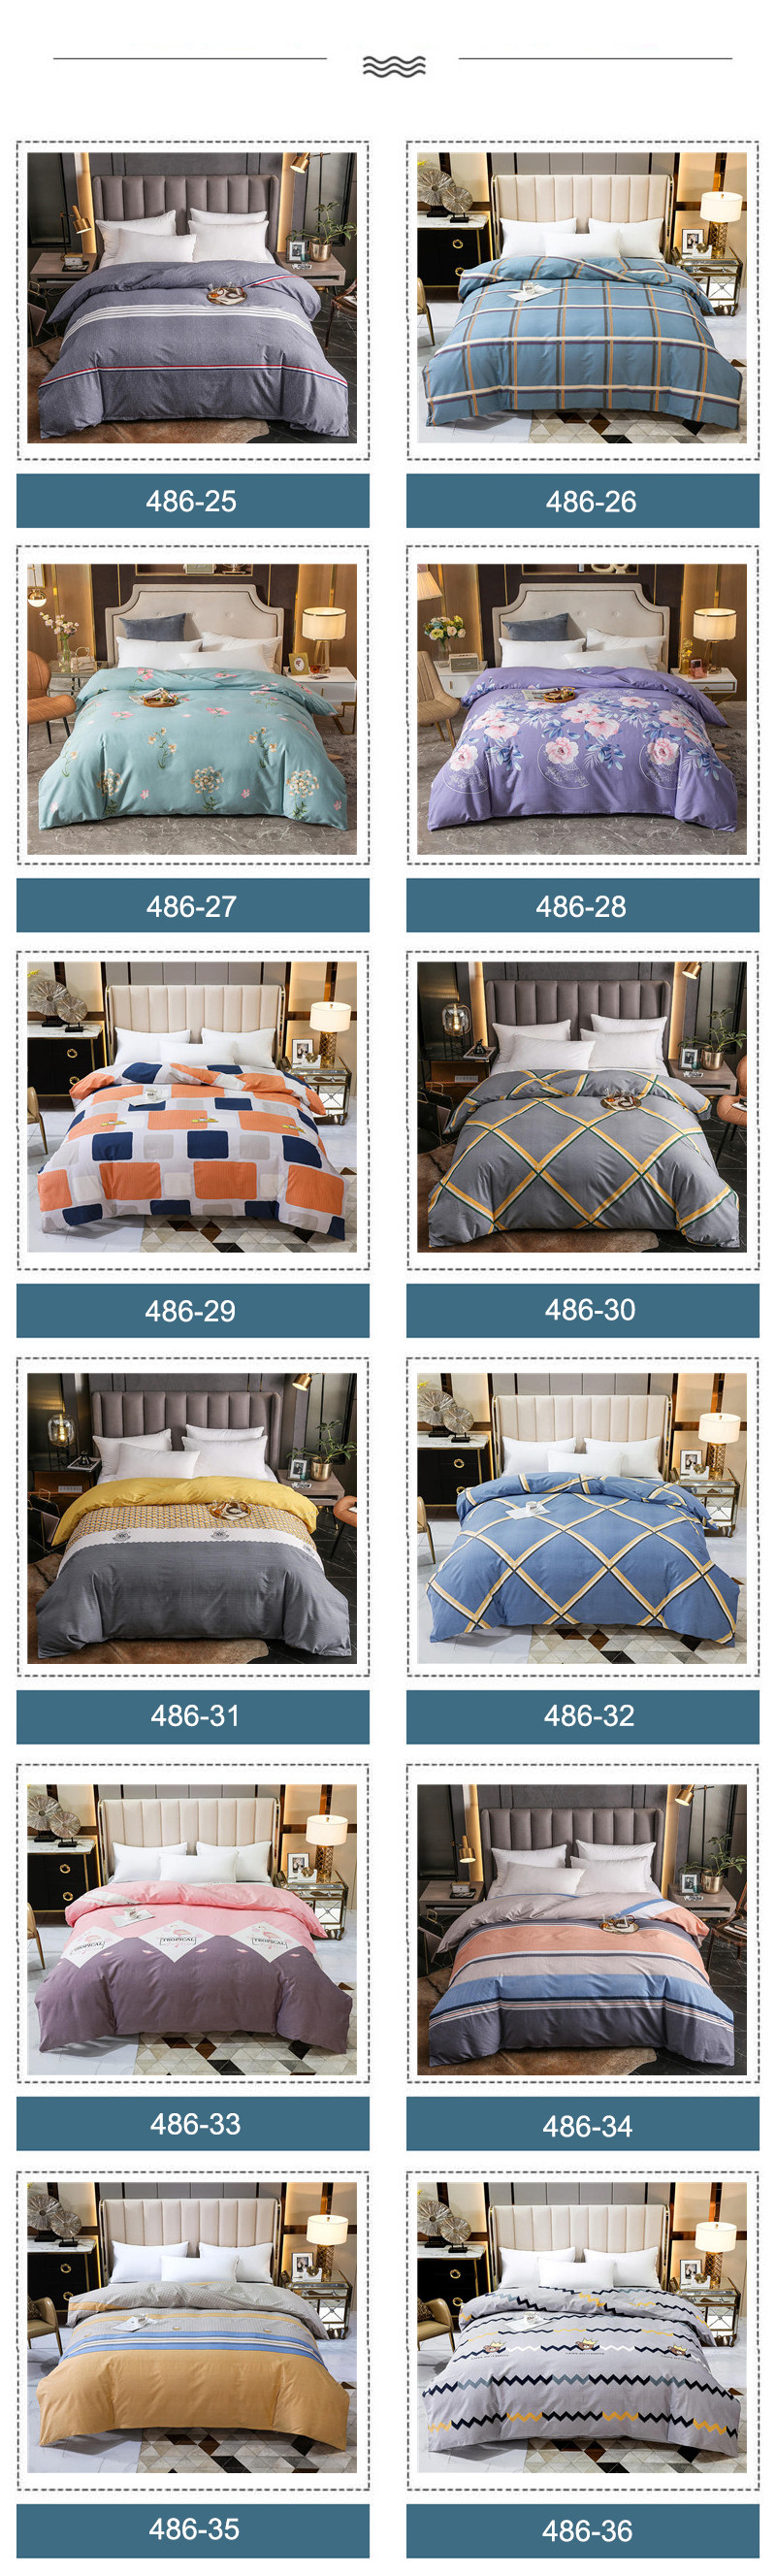 Home Sheet Sets For Queen Bed Discount Prices